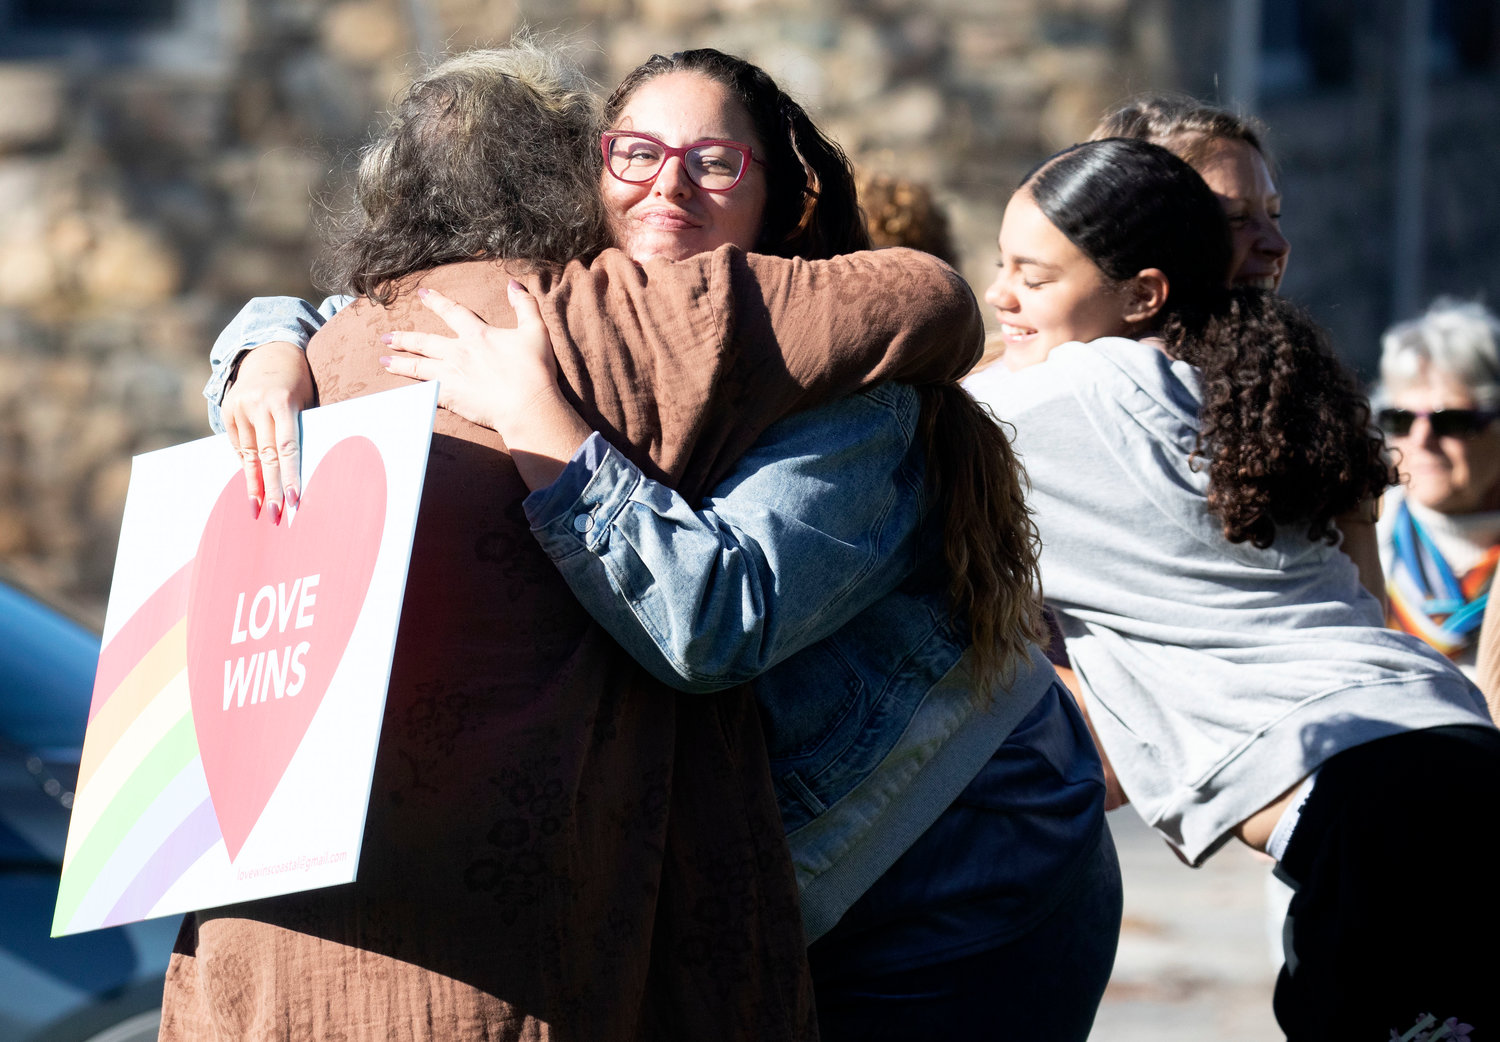 Megan Wordell (middle) and others hug during a rally held in Little Compton Sunday afternoon. The rally was organized by Love Wins as a counterpoint to an incendiary mailer sent out late last week to Little Compton residents, which criticized progressive politics and Democrats, and called out council and school committee members for their stances on sex education, the flying of the Pride flag, and other issues.